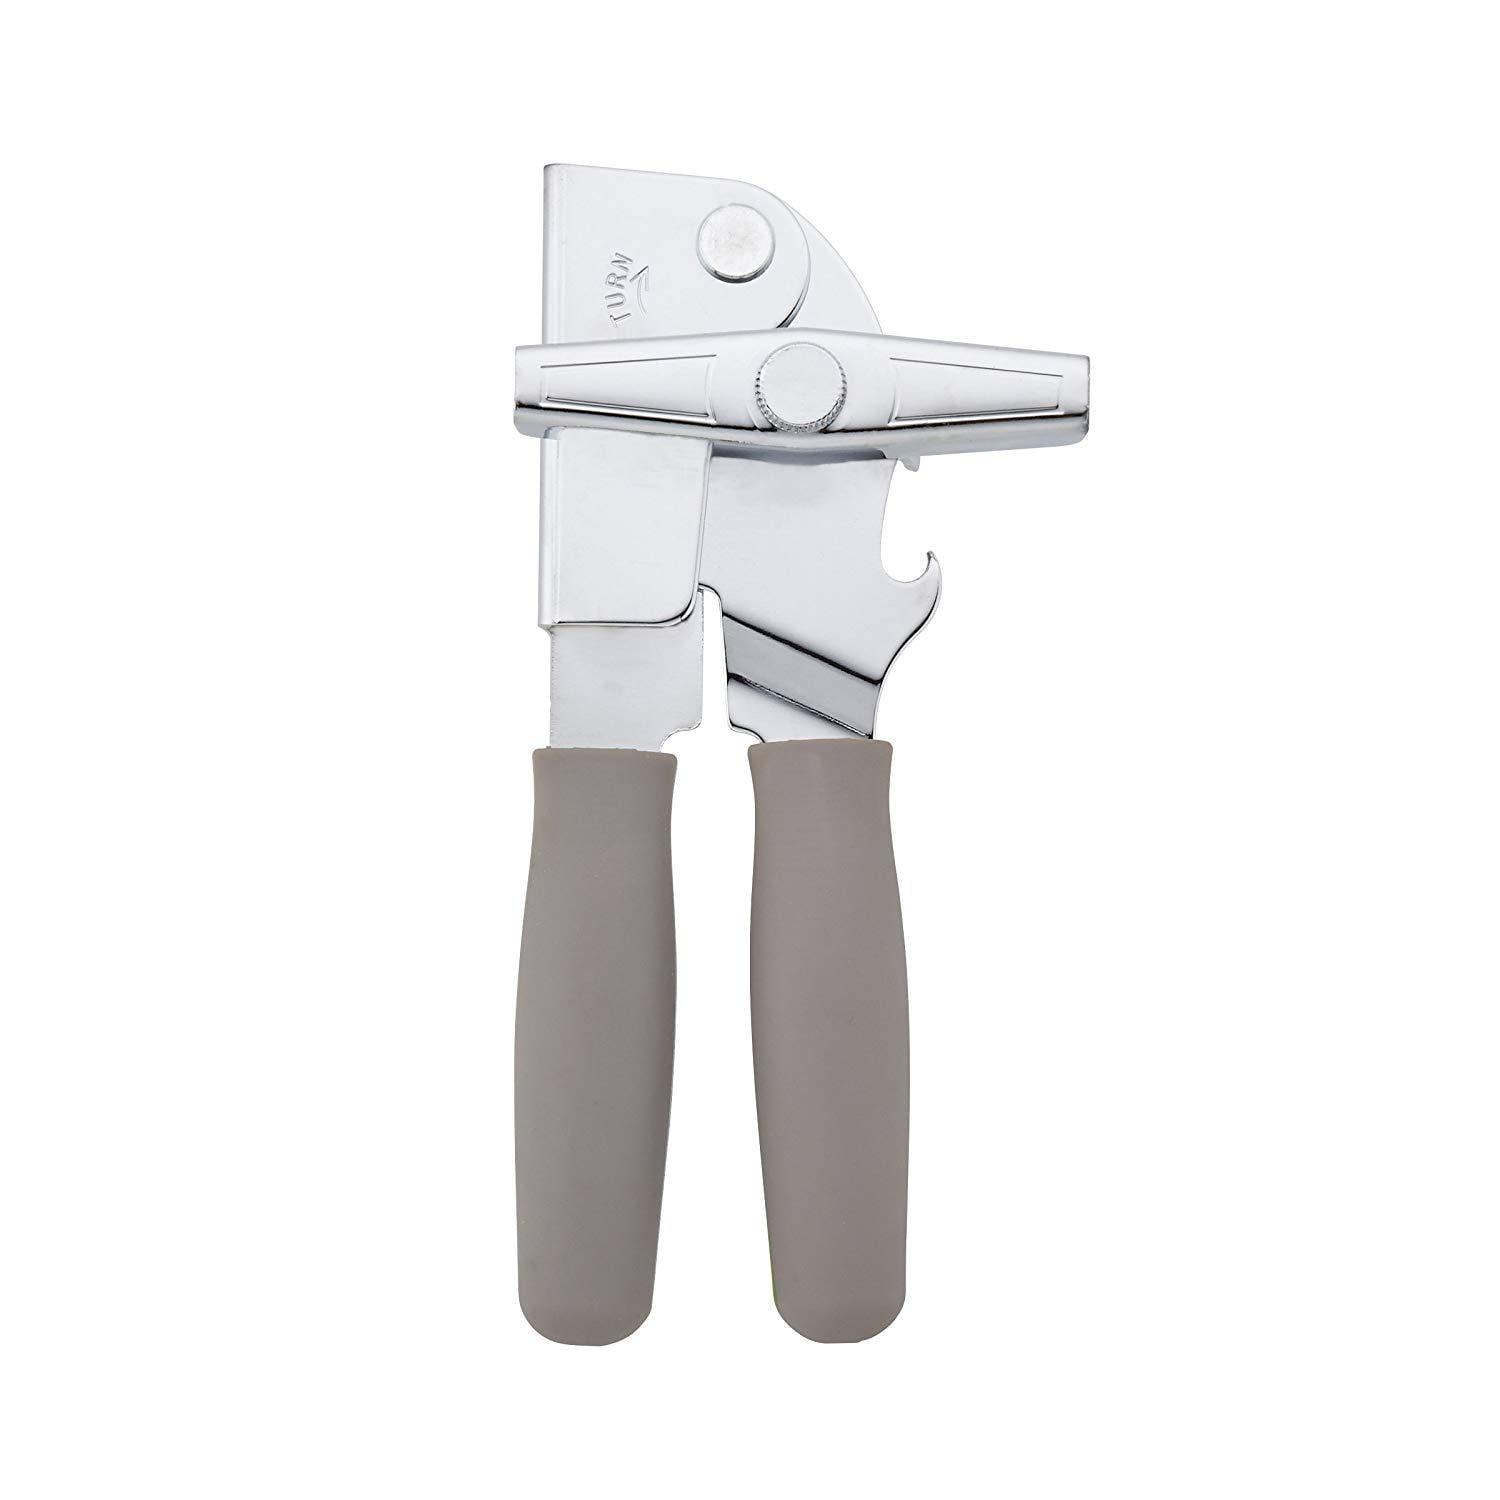  Swing-A-Way Portable Can Opener, Gray : Home & Kitchen